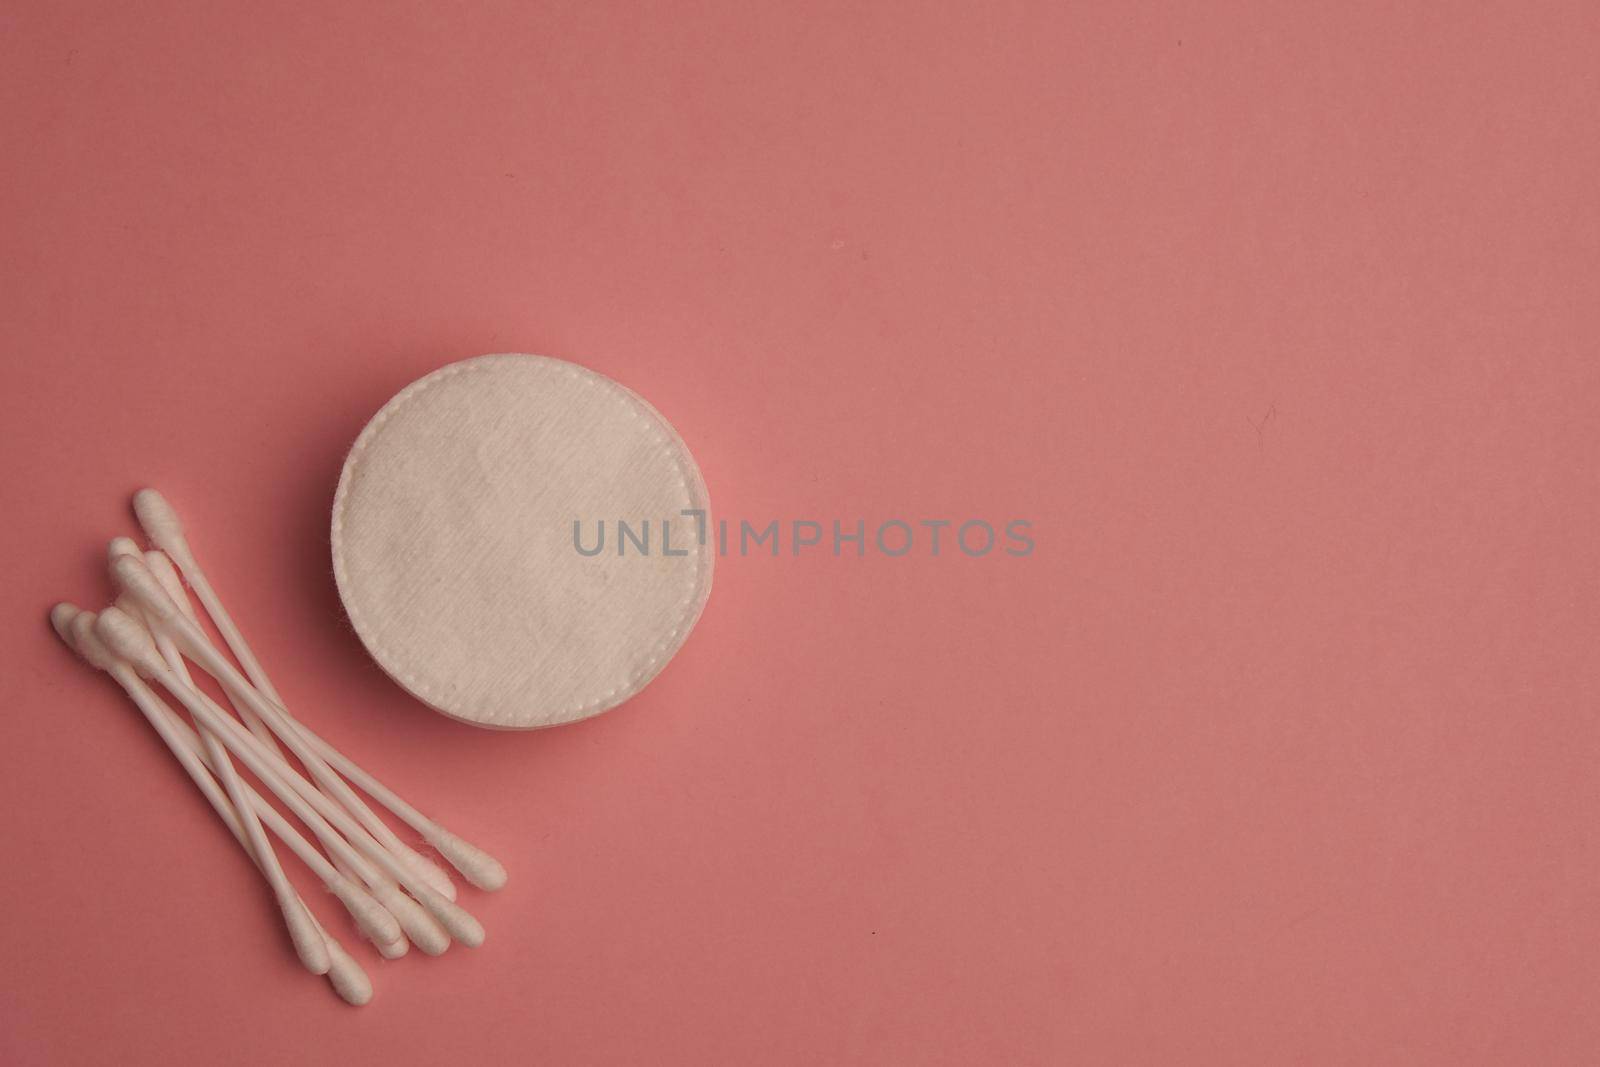 cotton swabs hygiene protection sanitation pink background by Vichizh